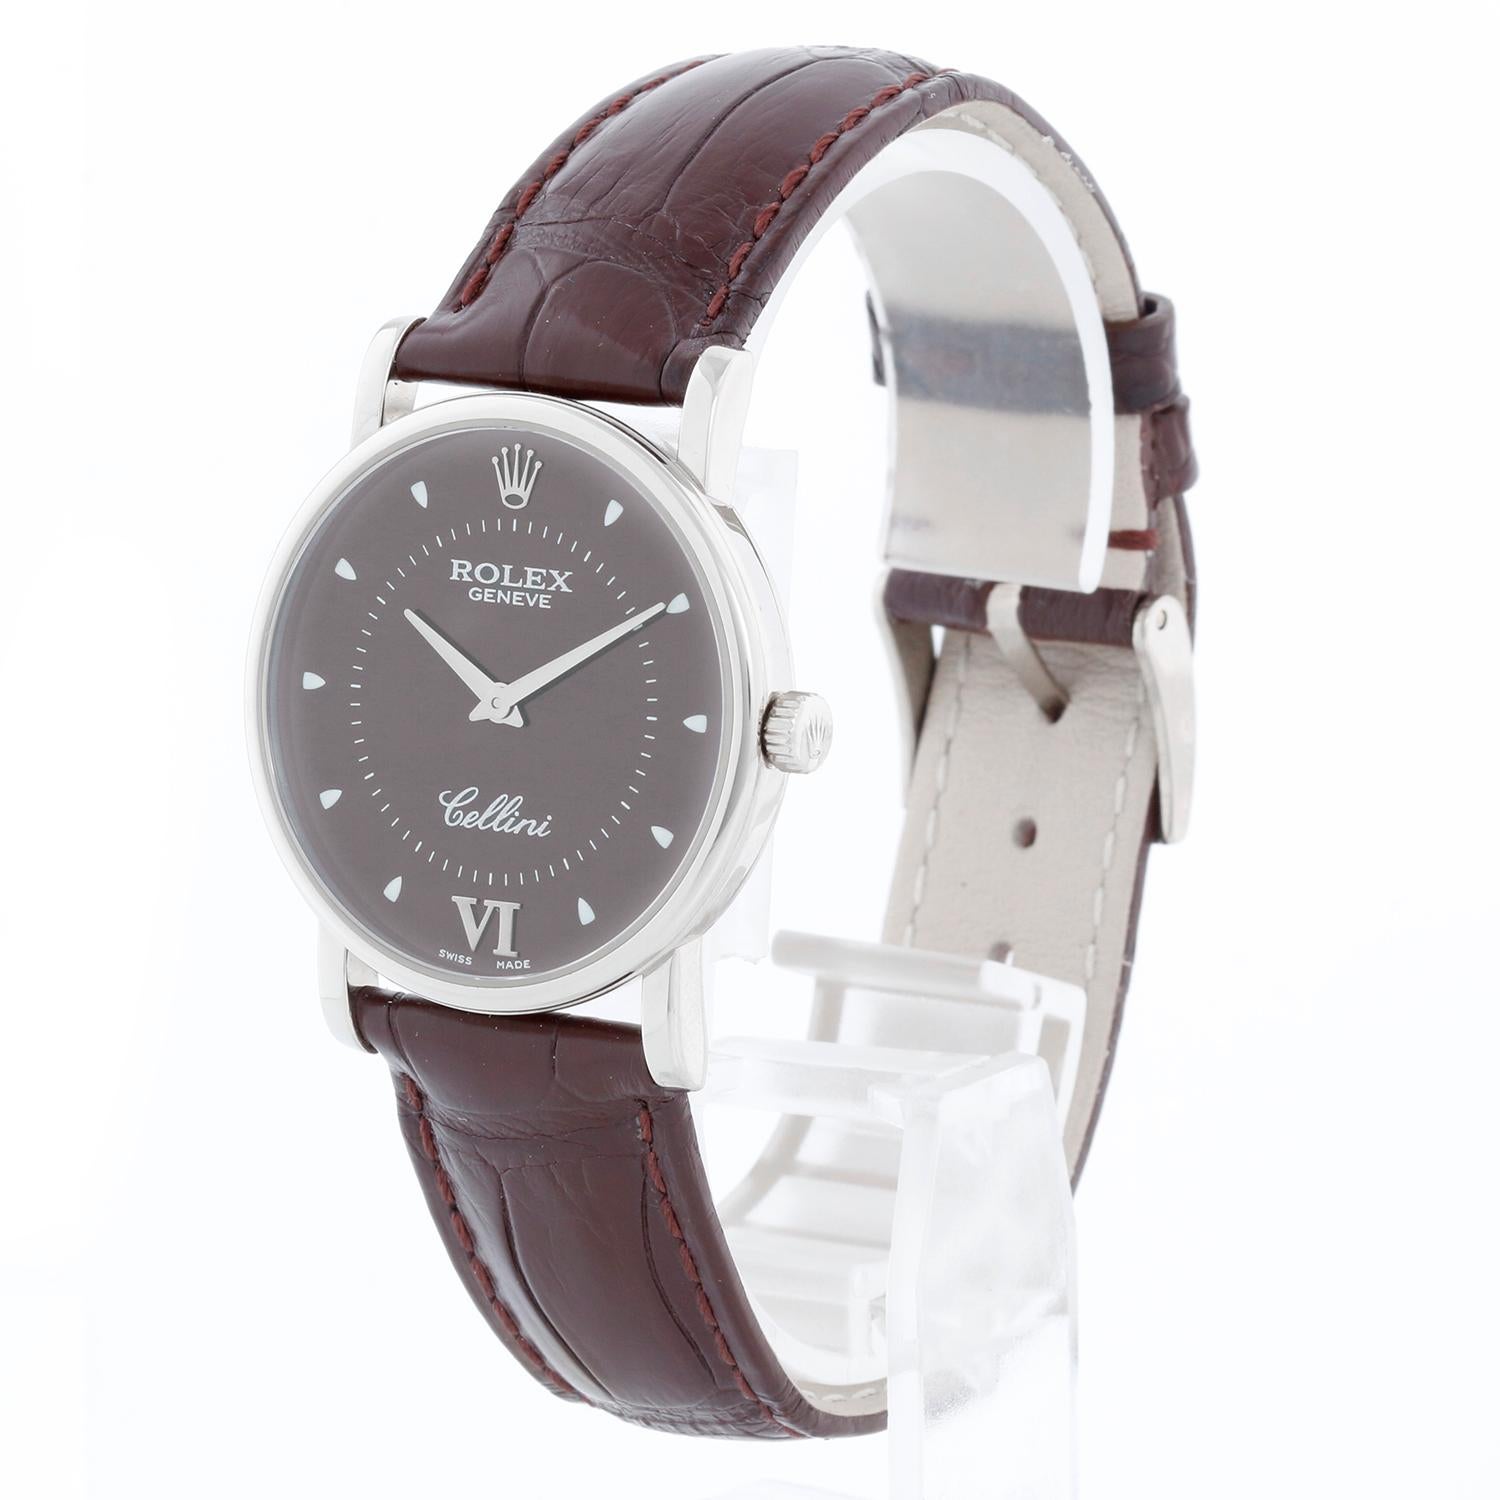 Rolex Cellini Classic 18k White Gold Men's Burgundy  Watch 5115/9 - Manual winding. 18k white gold case (32mm diameter). Burgundy brown dial. Burgundy brown  Factory Rolex strap band with 18k white gold Rolex buckle. Pre-owned with custom box and